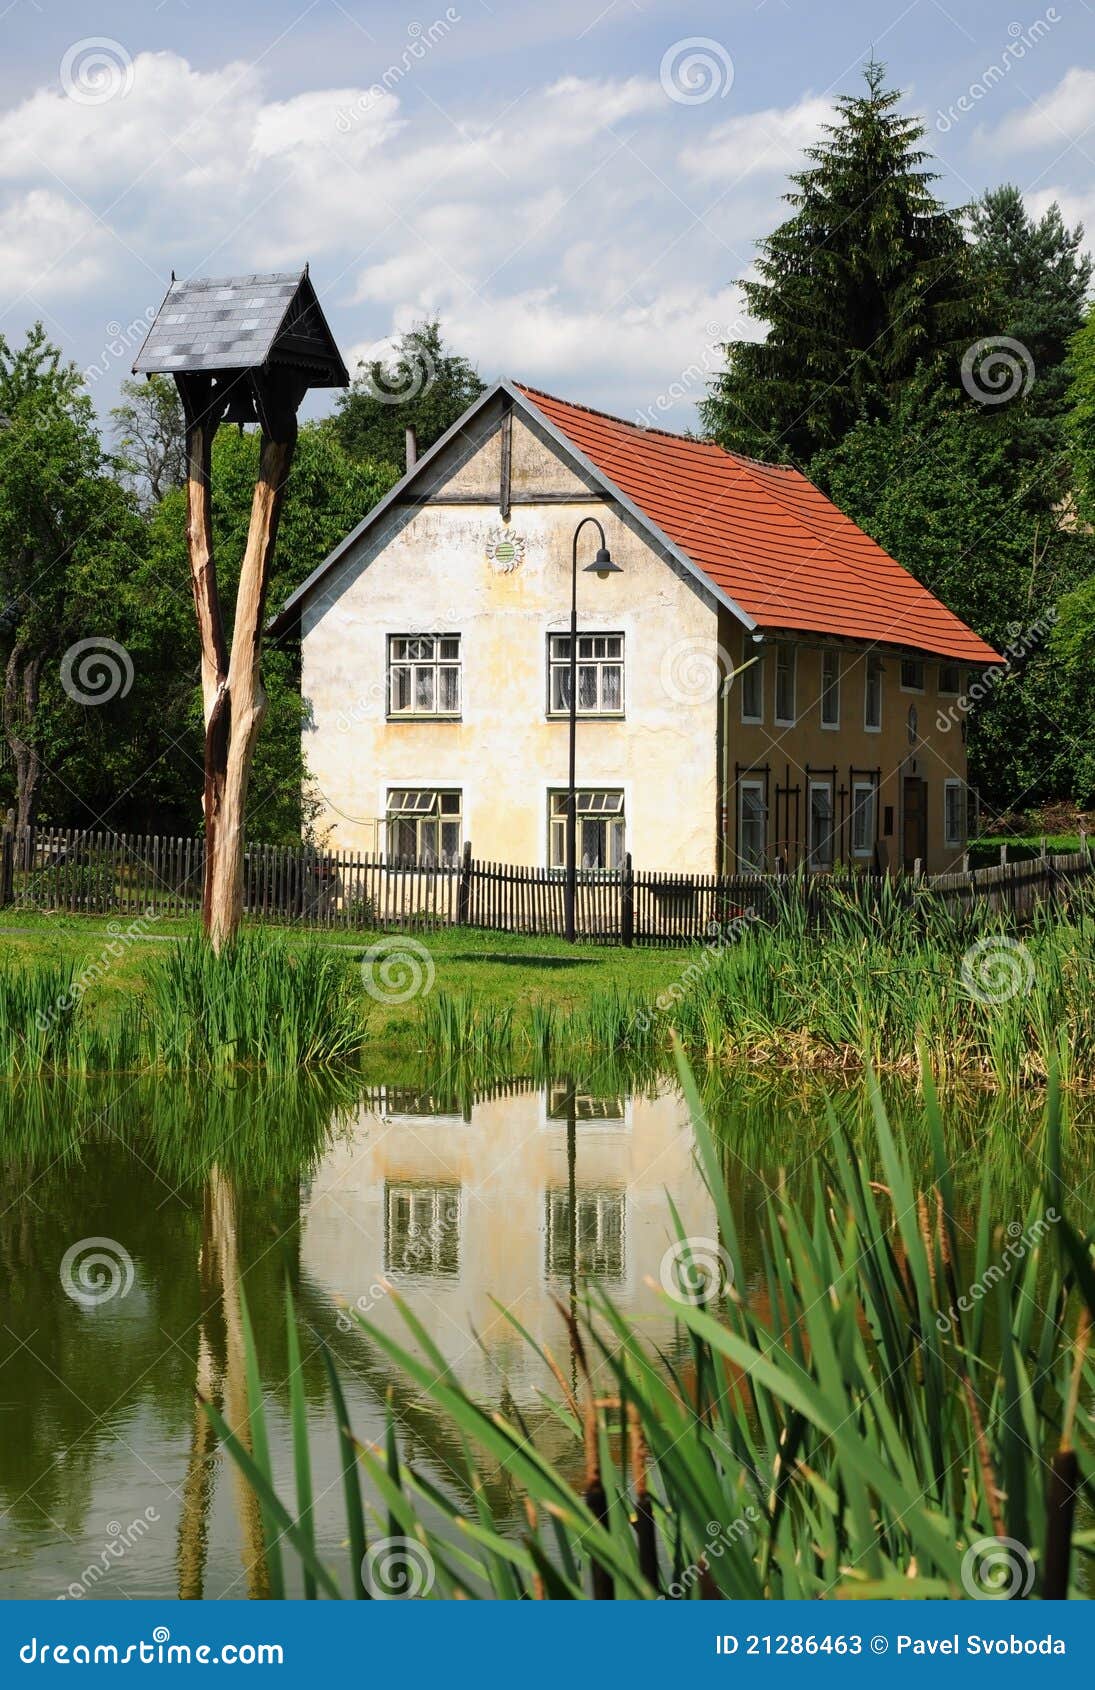  Old Traditional House Czech Republic Stock Photos Image 